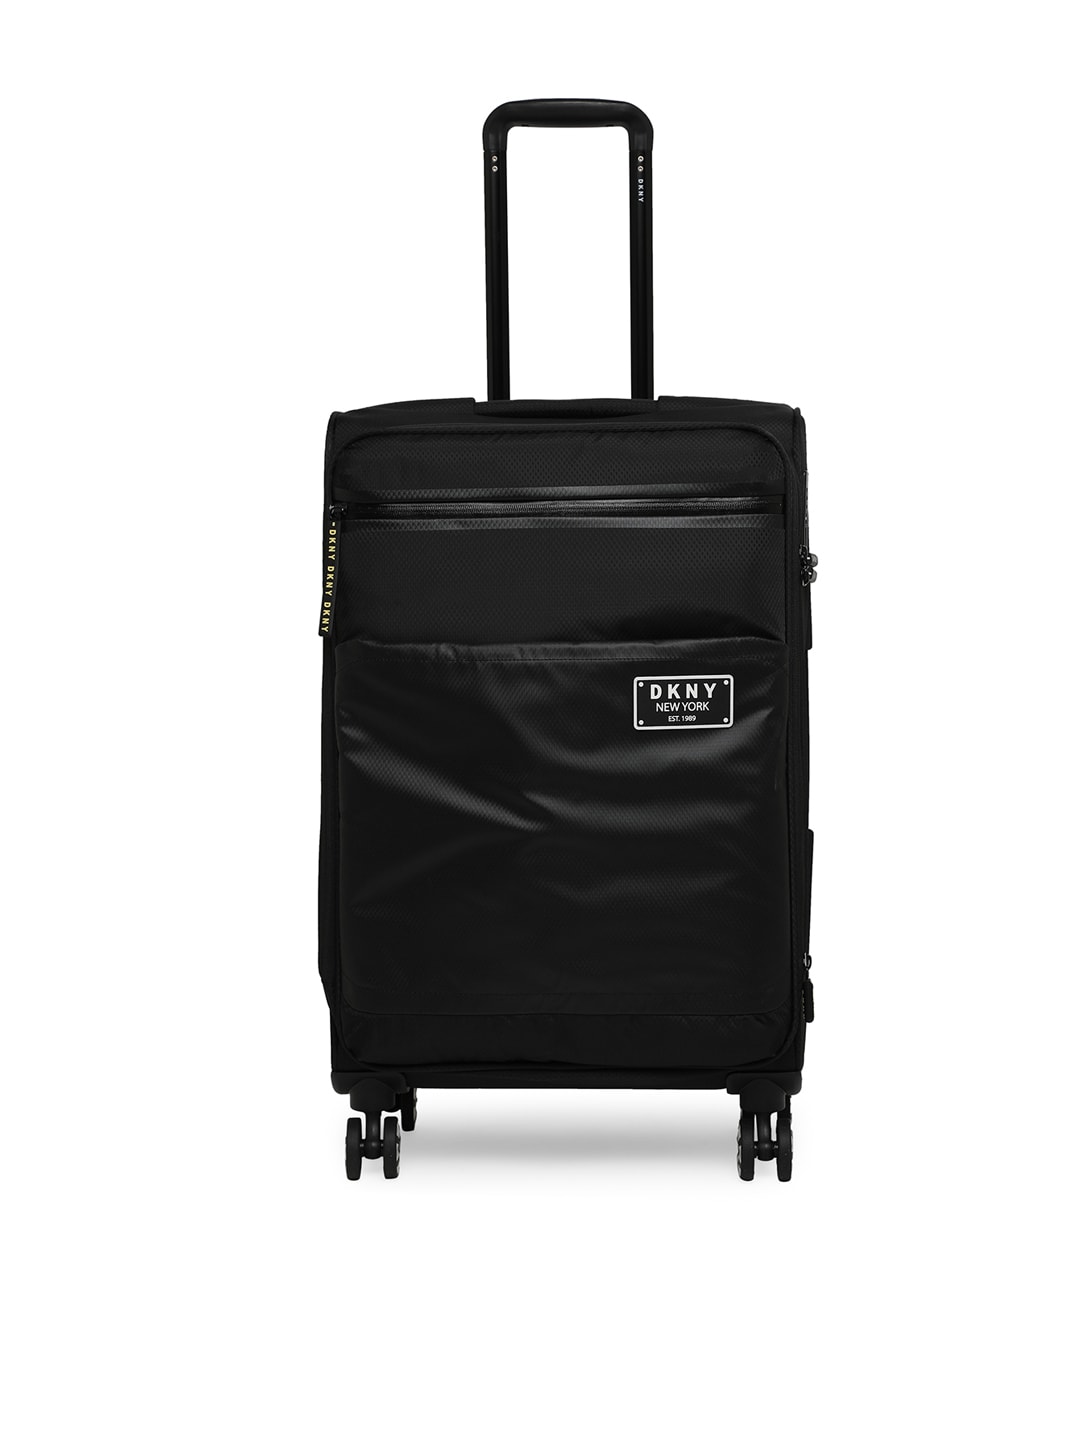 Black Textured GLOBE TROTTER Soft-Sided Medium Trolley Suitcase Price in India